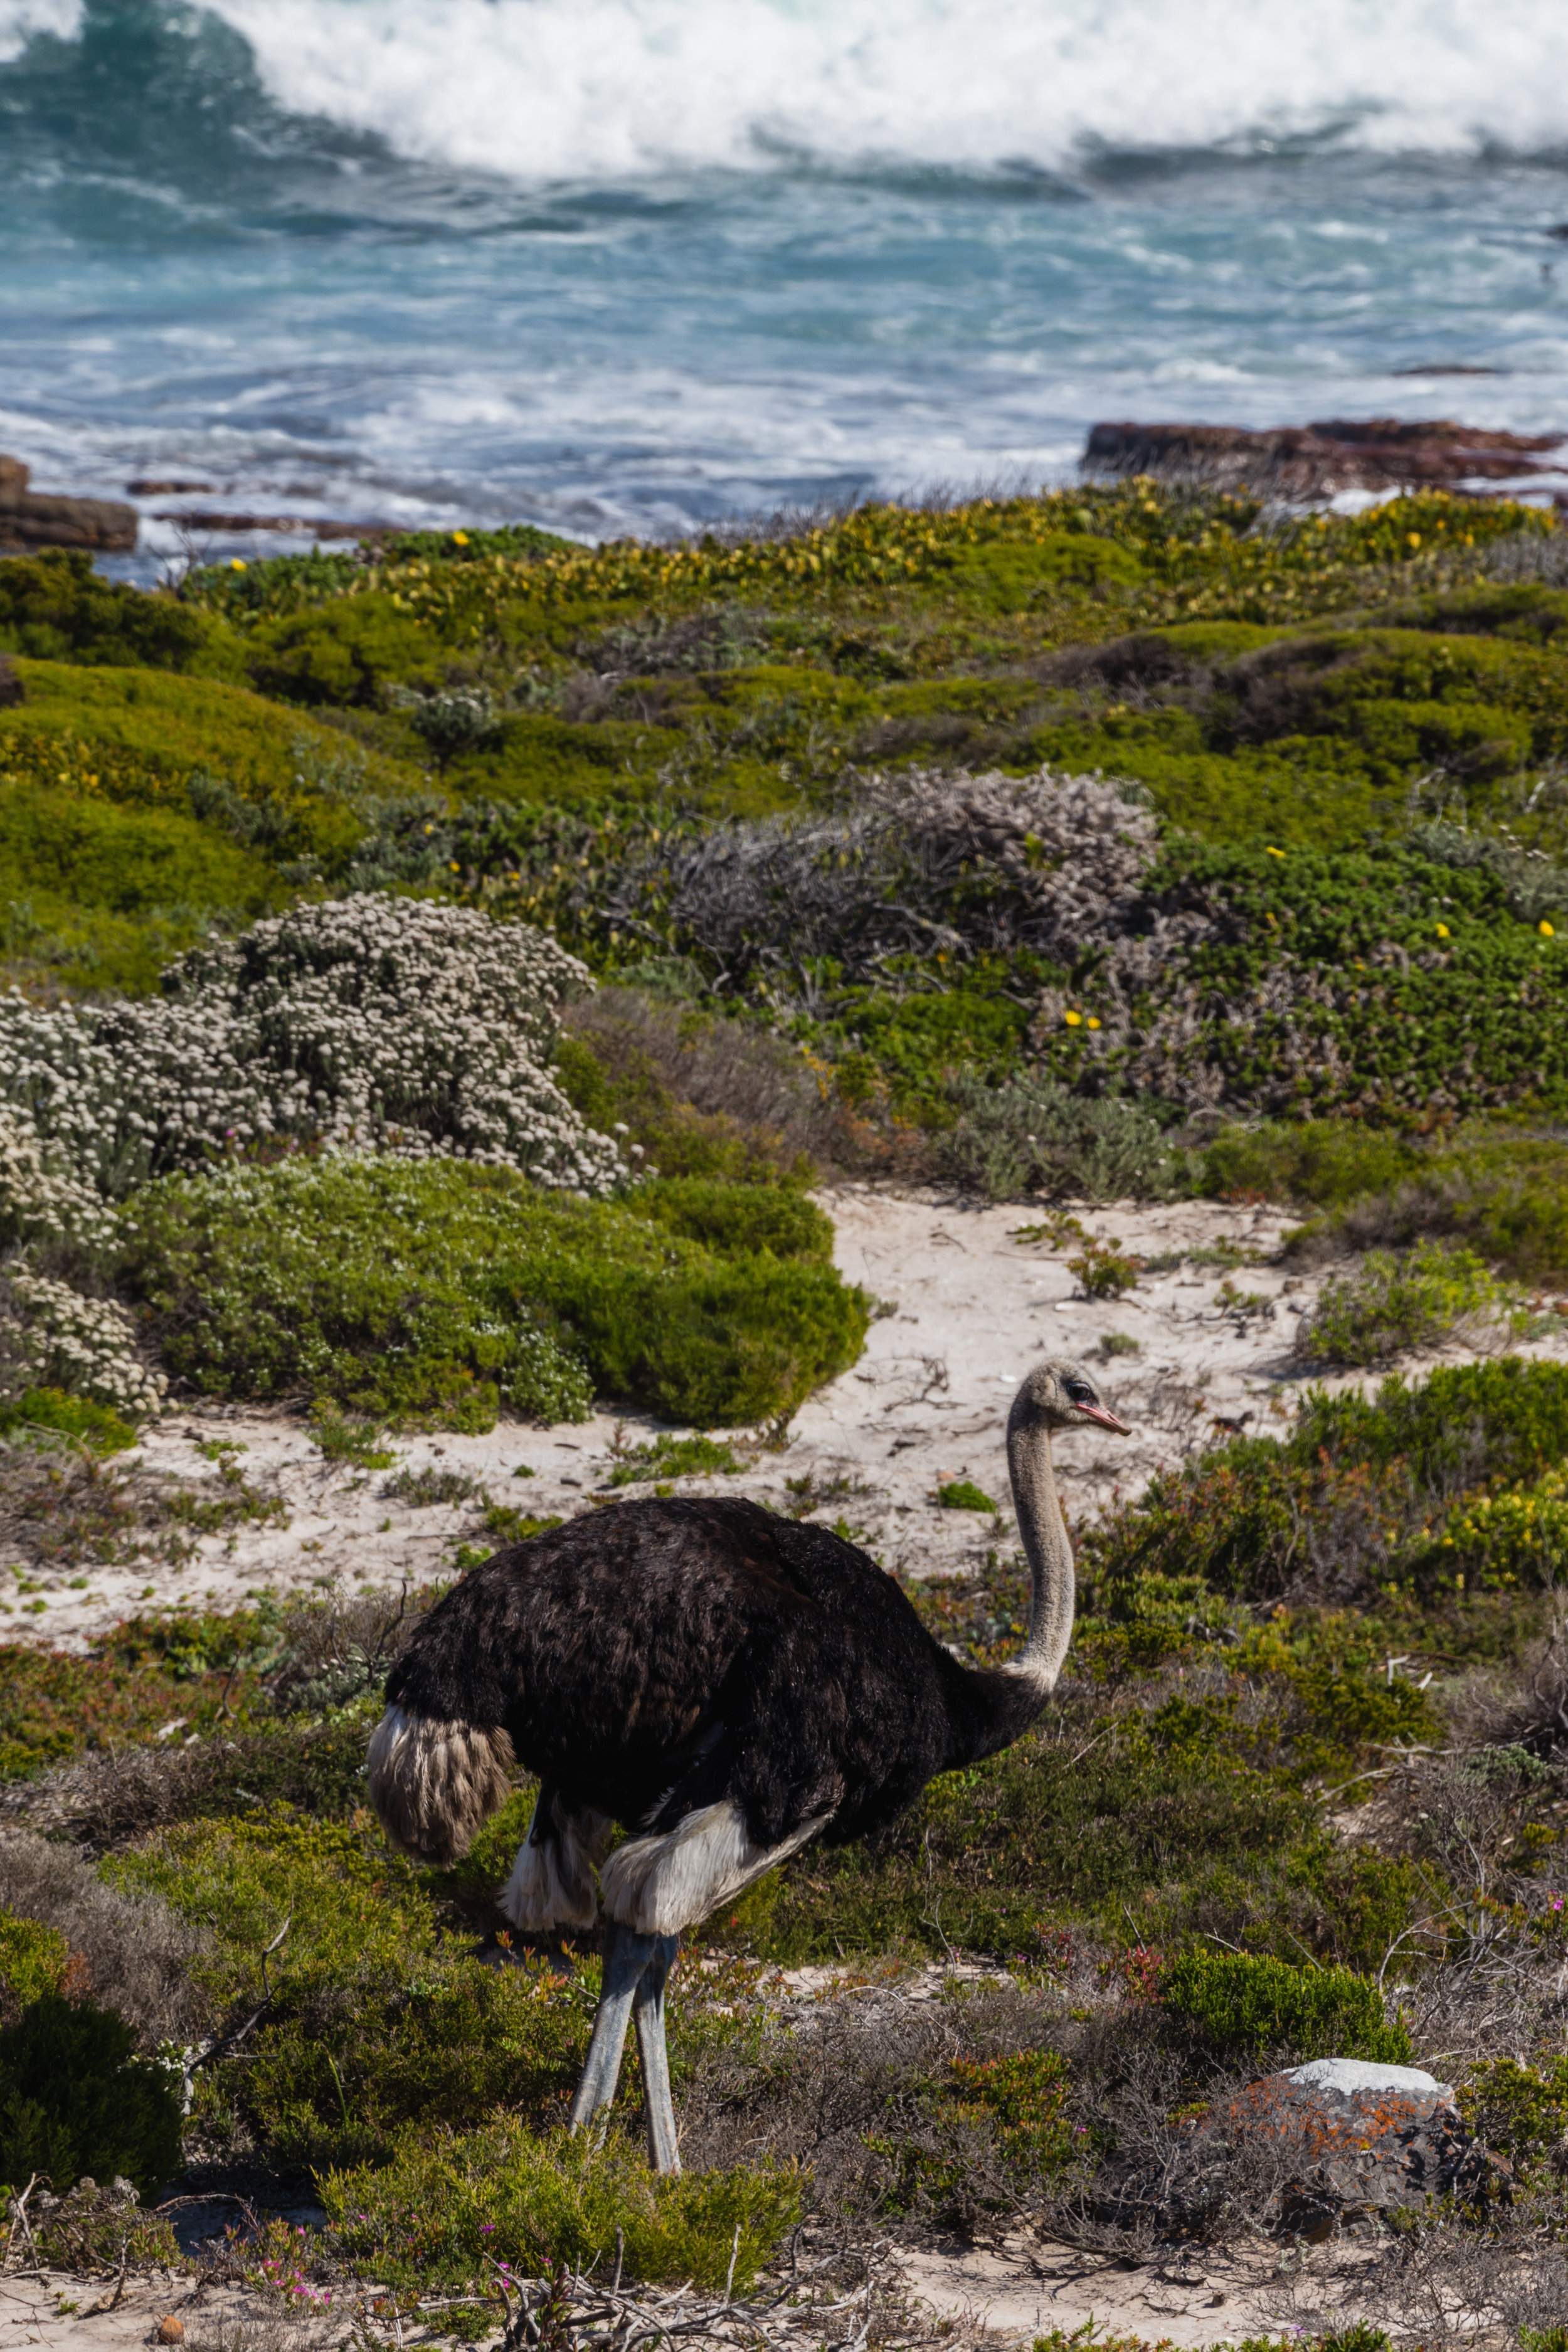 Cape Ostrich. Cape Of Good Hope, South Africa (Aug. 2019)